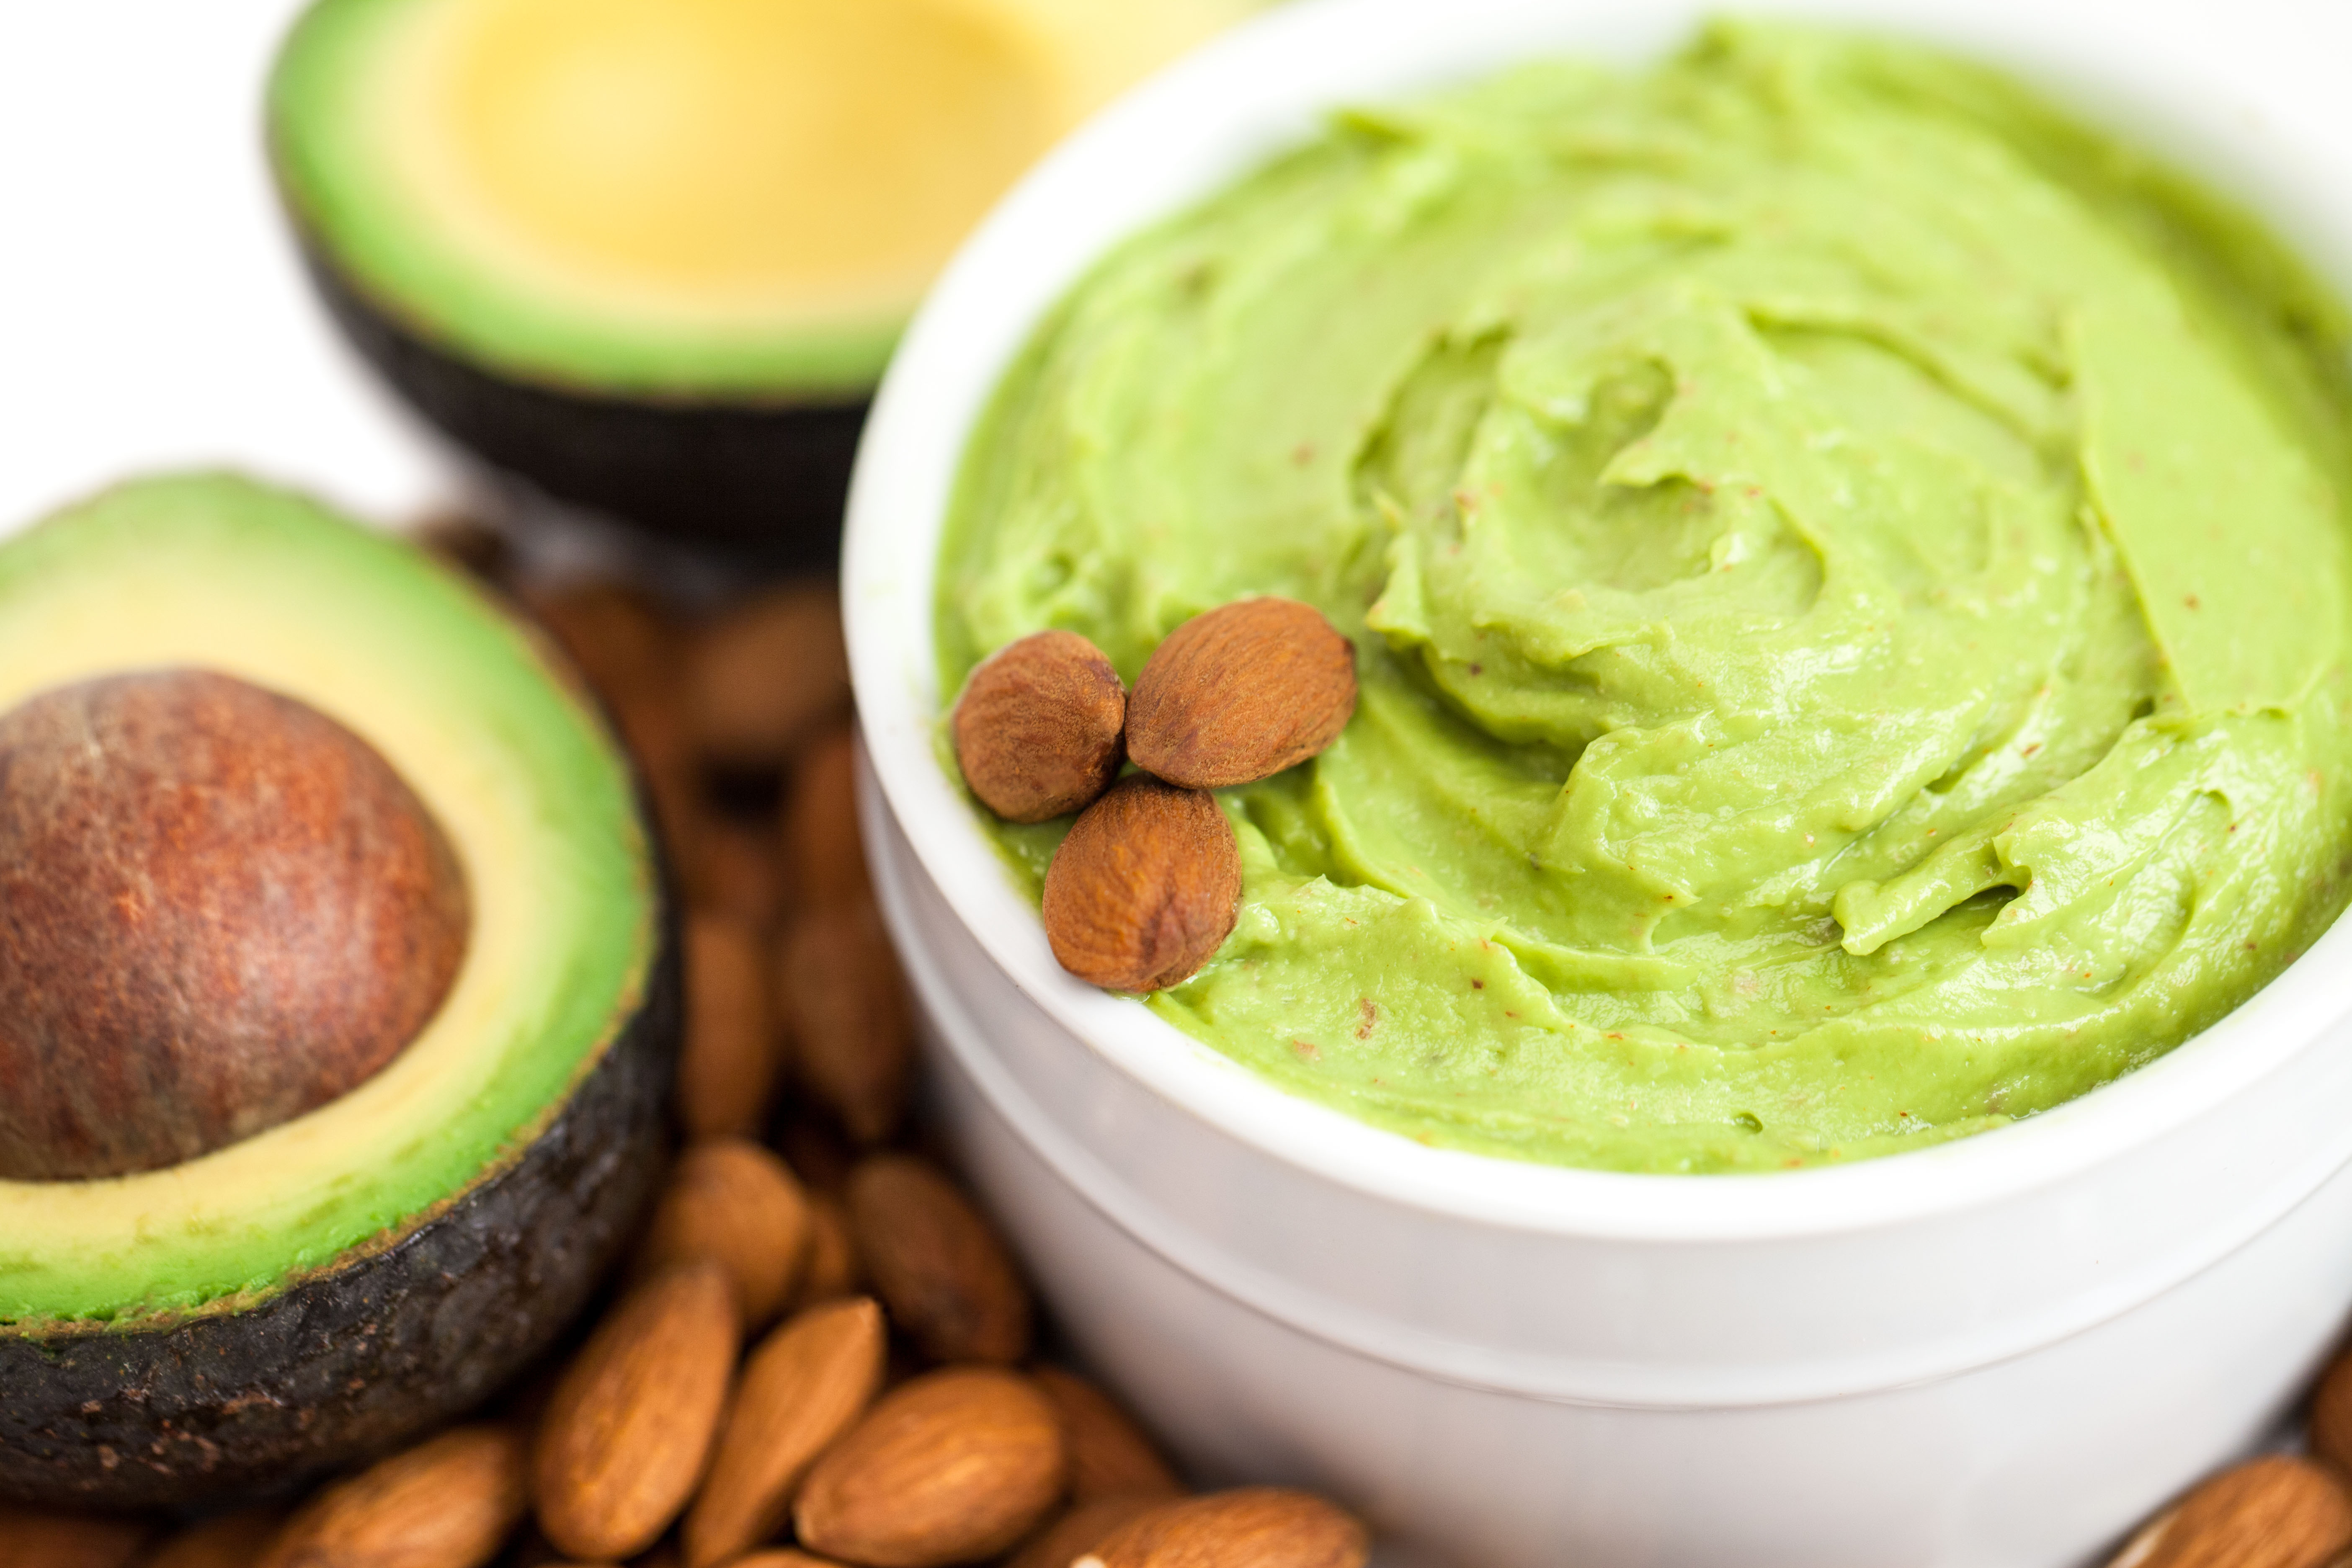 and avocado  skin for blackheads Revive diy acne this and with face facial dry mask! masks yogurt nourishing